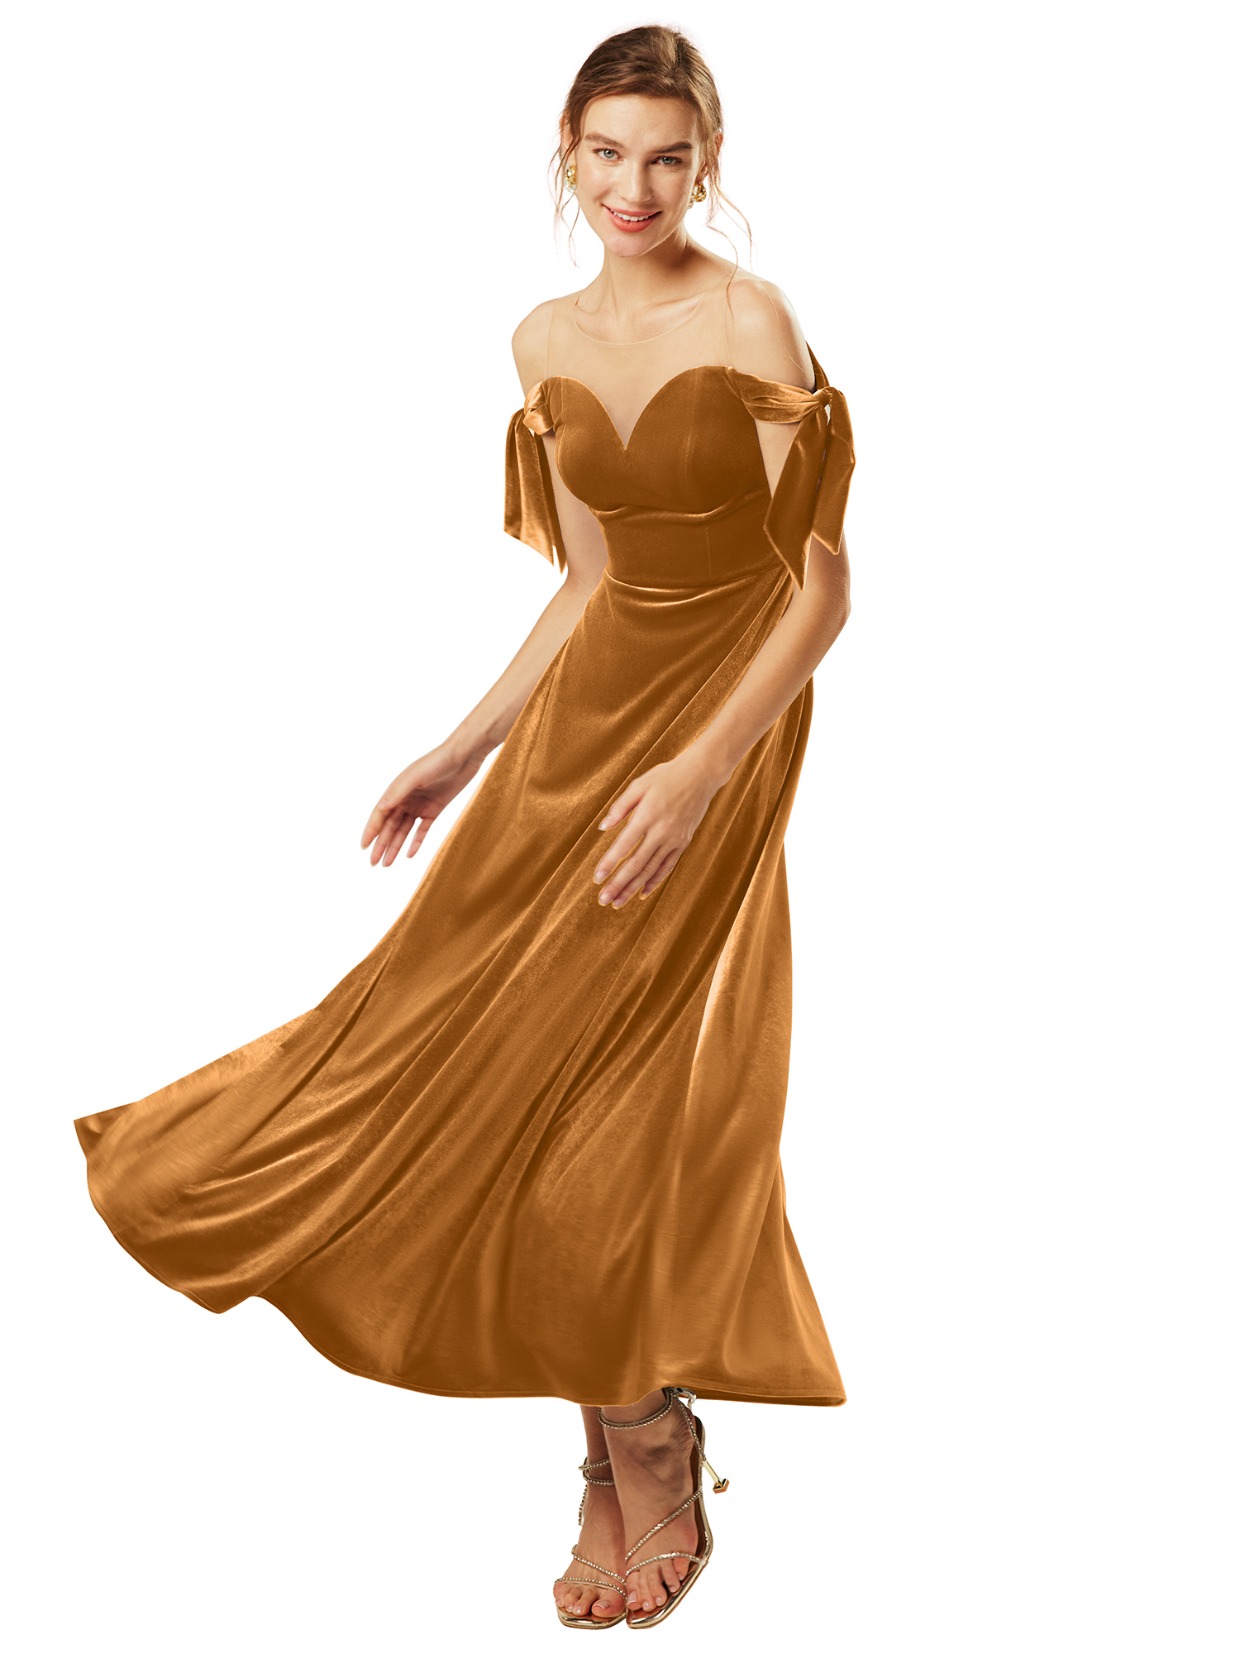 off the shoulder tie bridesmaid dress from AW Bridal in amber velvet